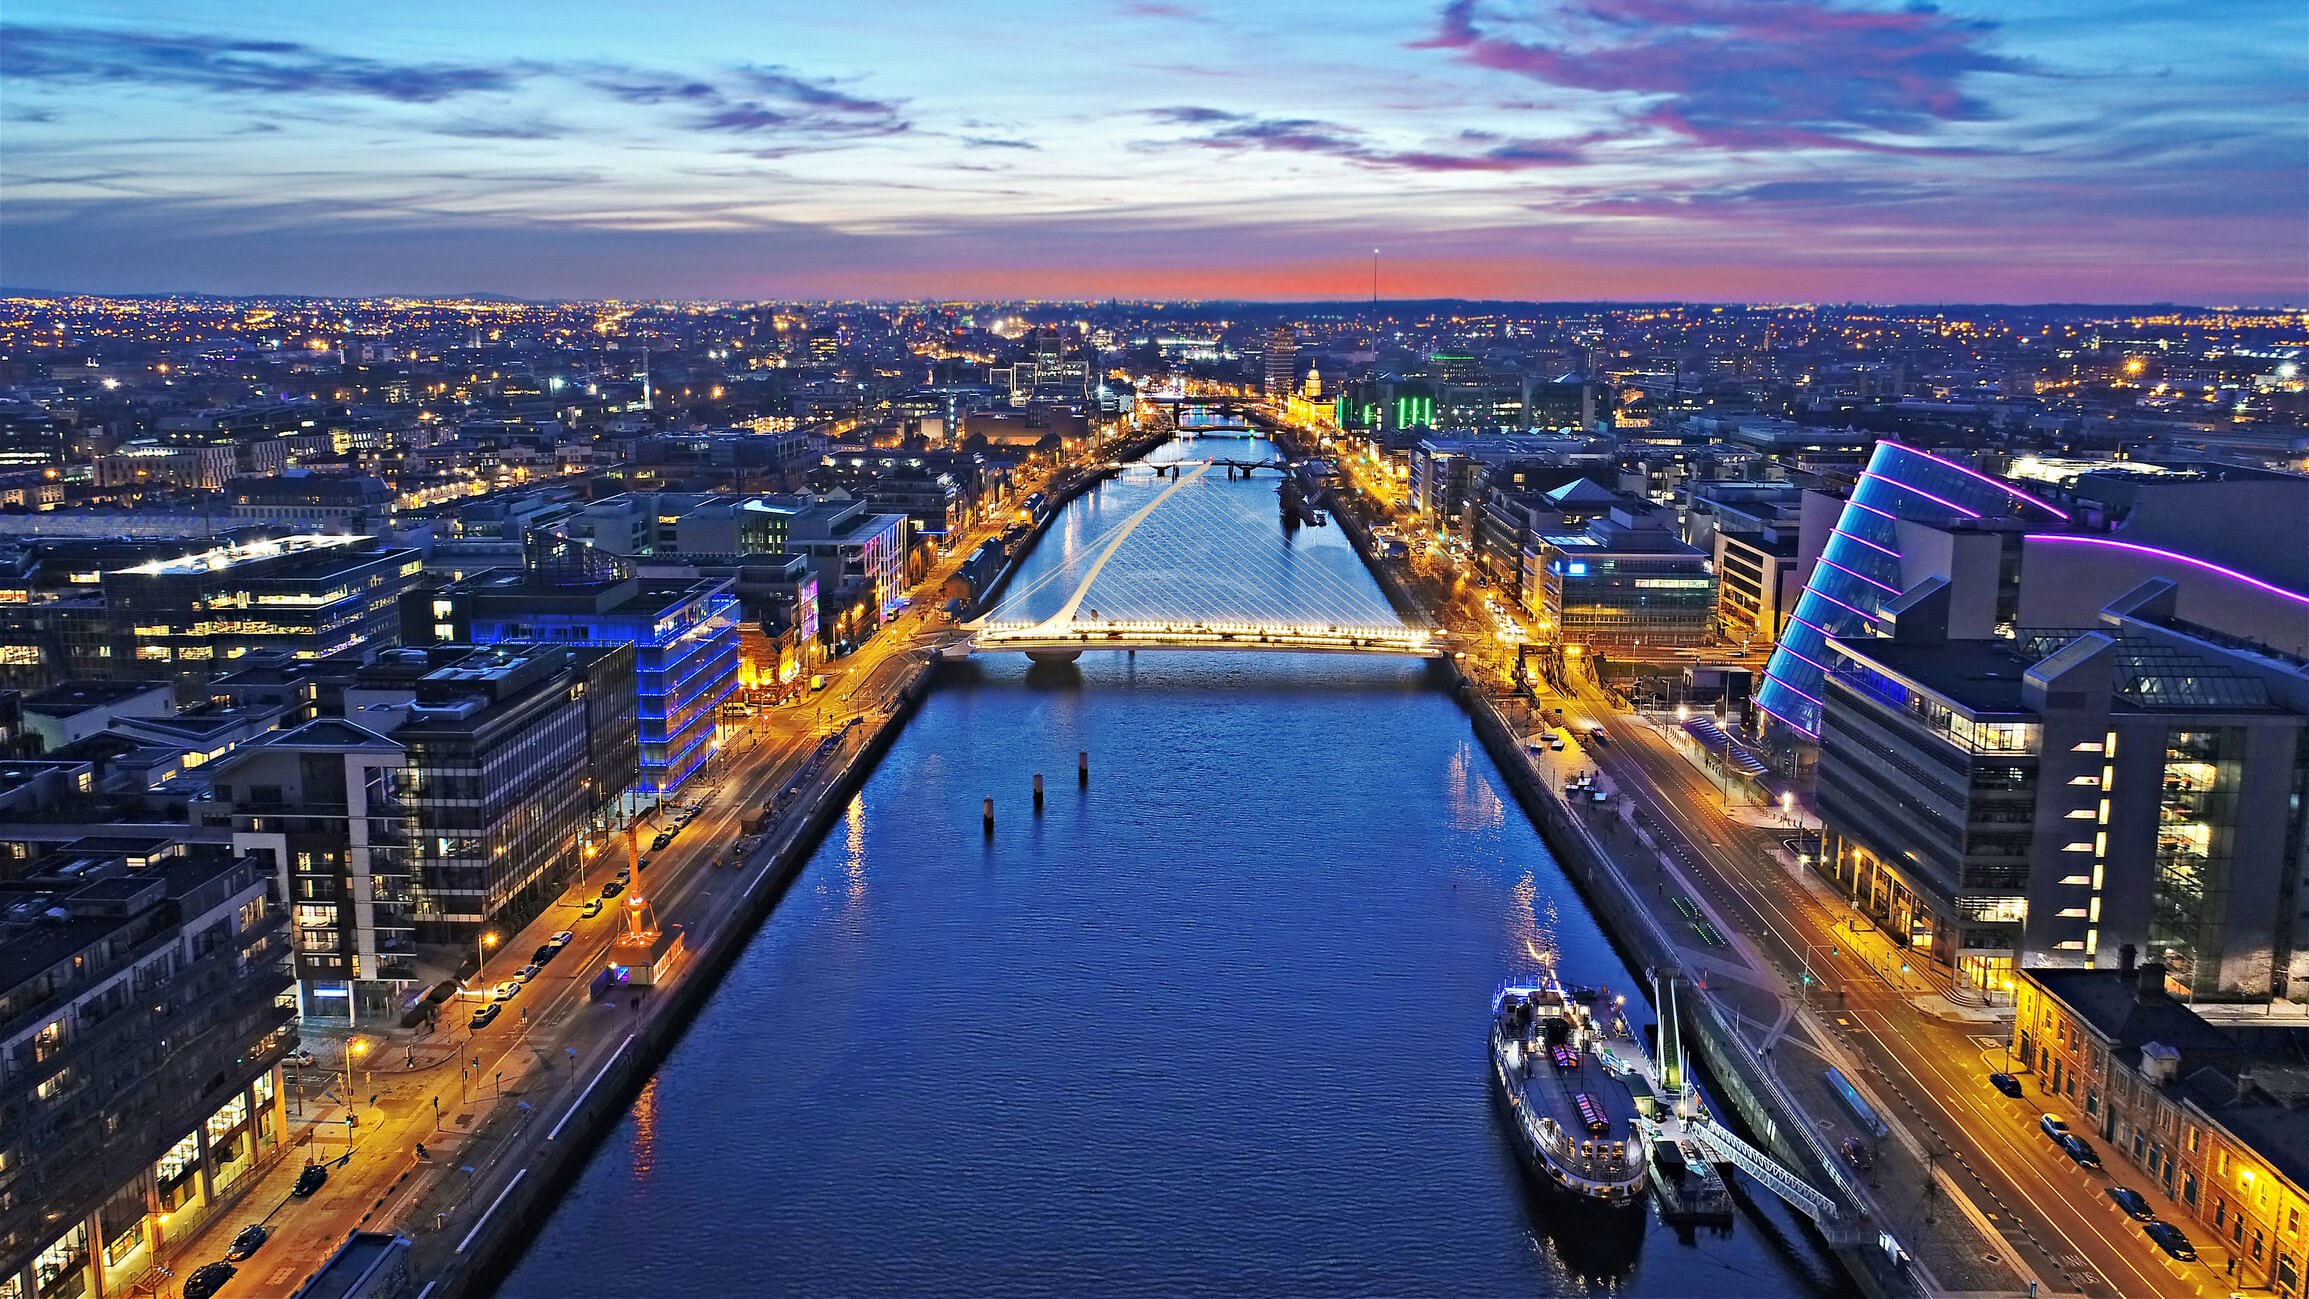 Image of River Liffy*, located in Dublin.